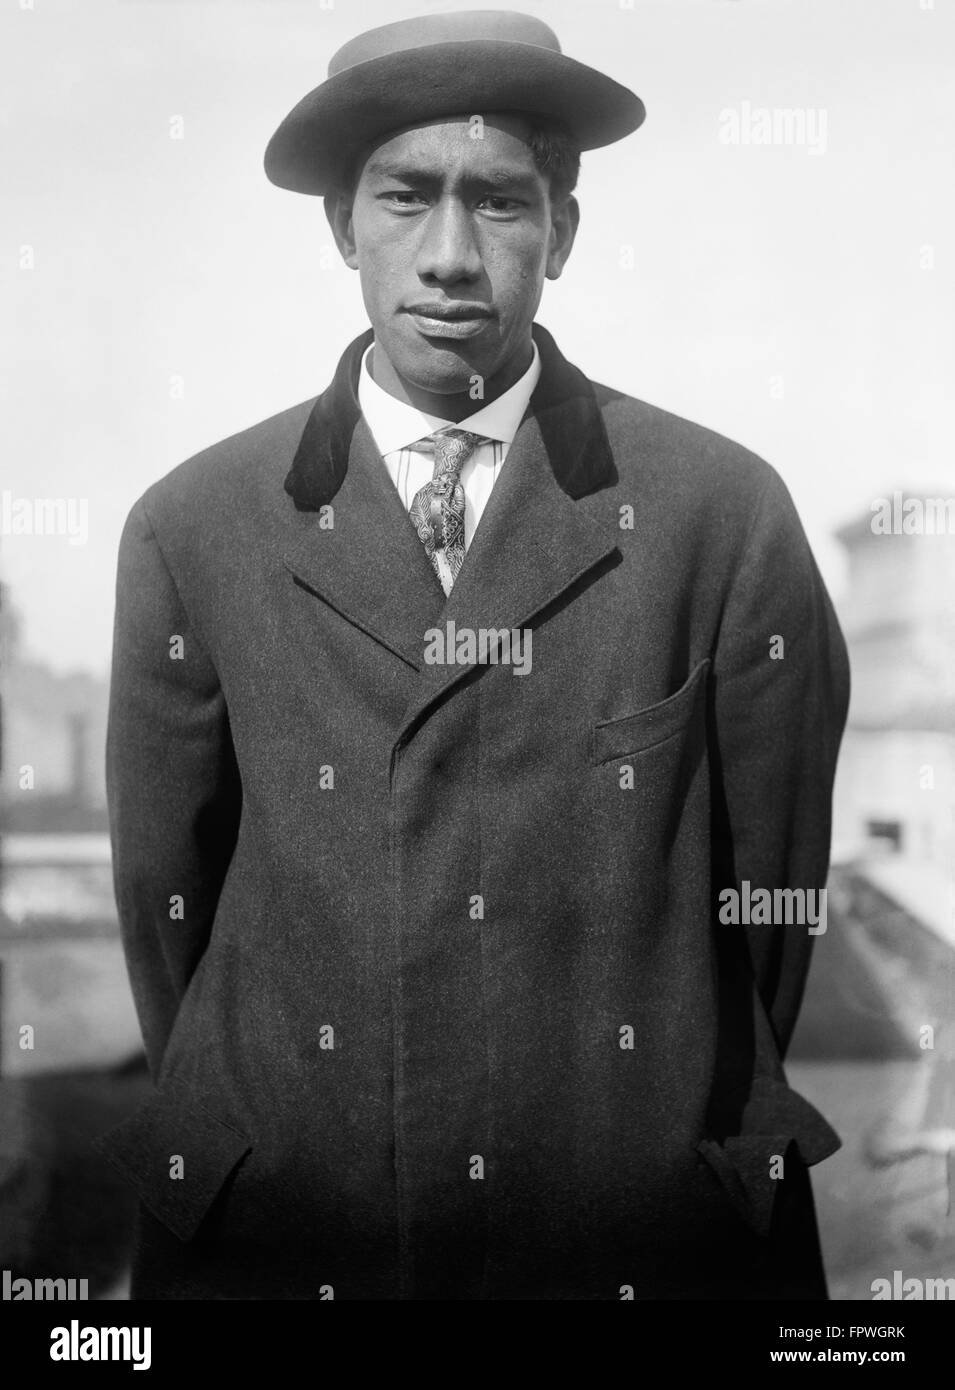 Duke Paoa Kahanamoku, legendary surfer and Olympic swimmer from Honolulu, Hawaii, is included in the Surfing Hall of Fame, Swimming Hall of Fame, and the Olympic Hall of Fame. (Shown here in 1912 on trip to New York for the Olympic trials.) Stock Photo